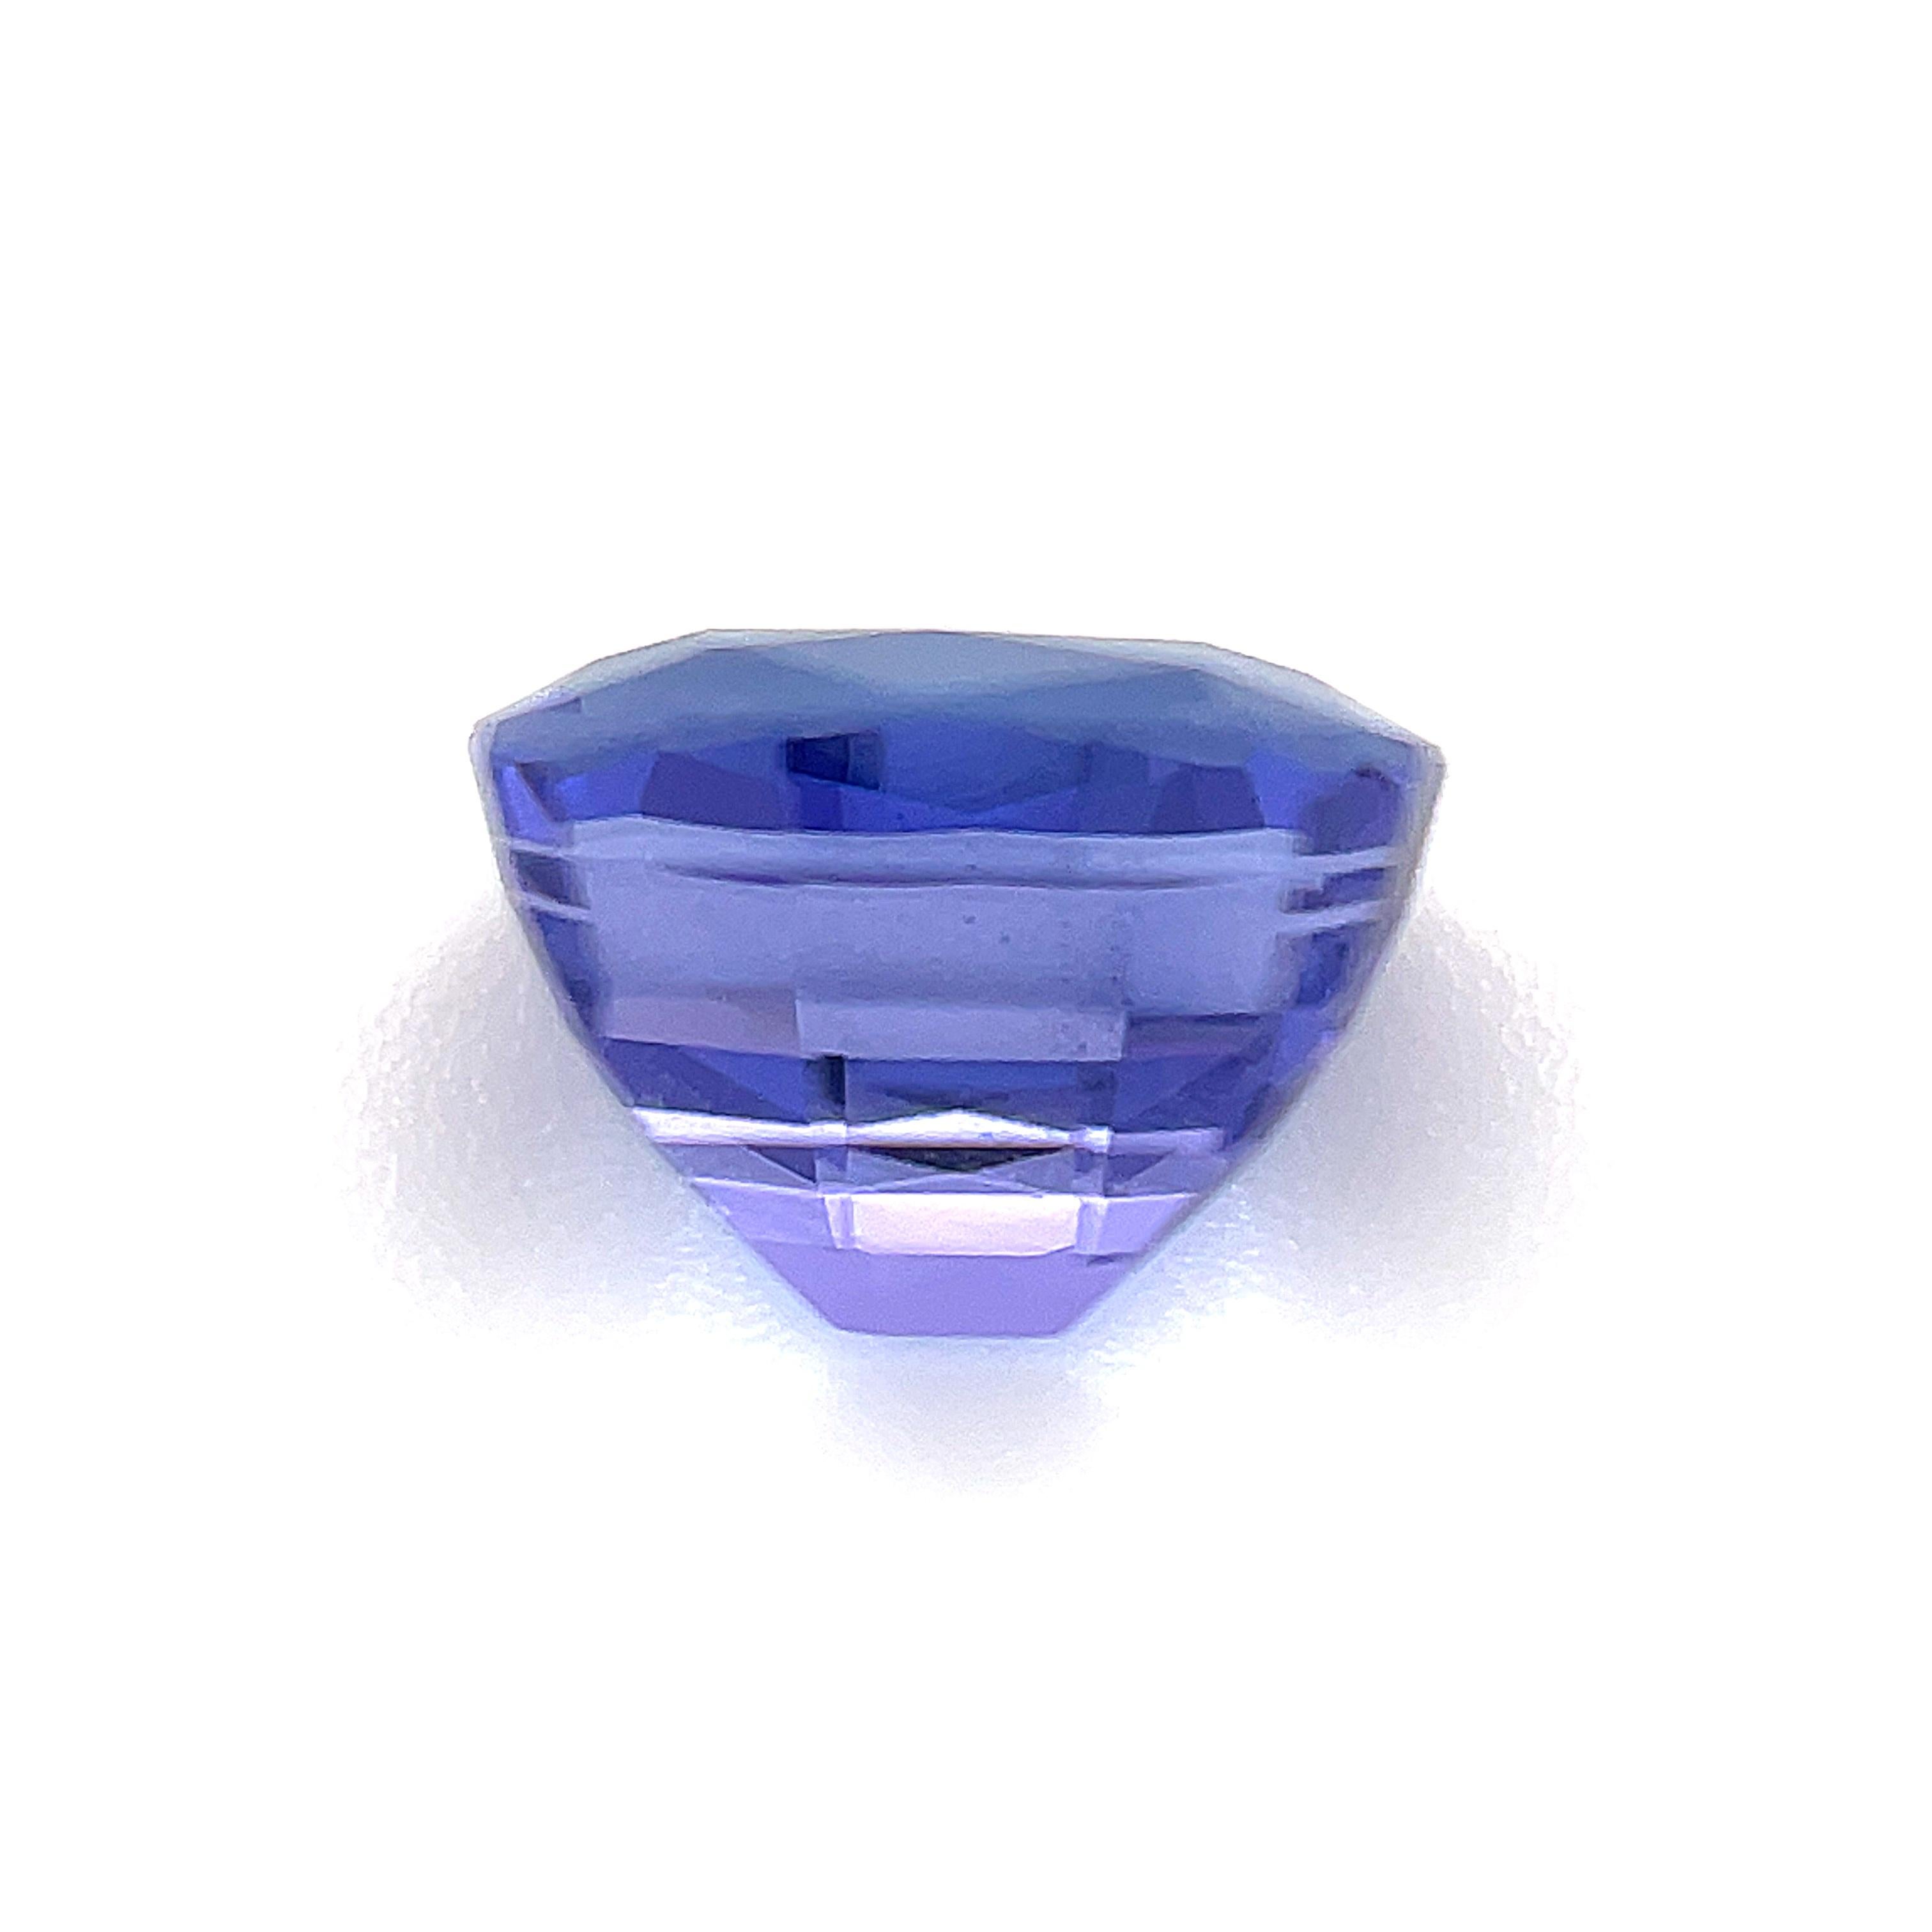 1.17 Carat Unset Loose Unmounted Cushion Shaped Tanzanite Gemstone In New Condition For Sale In Los Angeles, CA